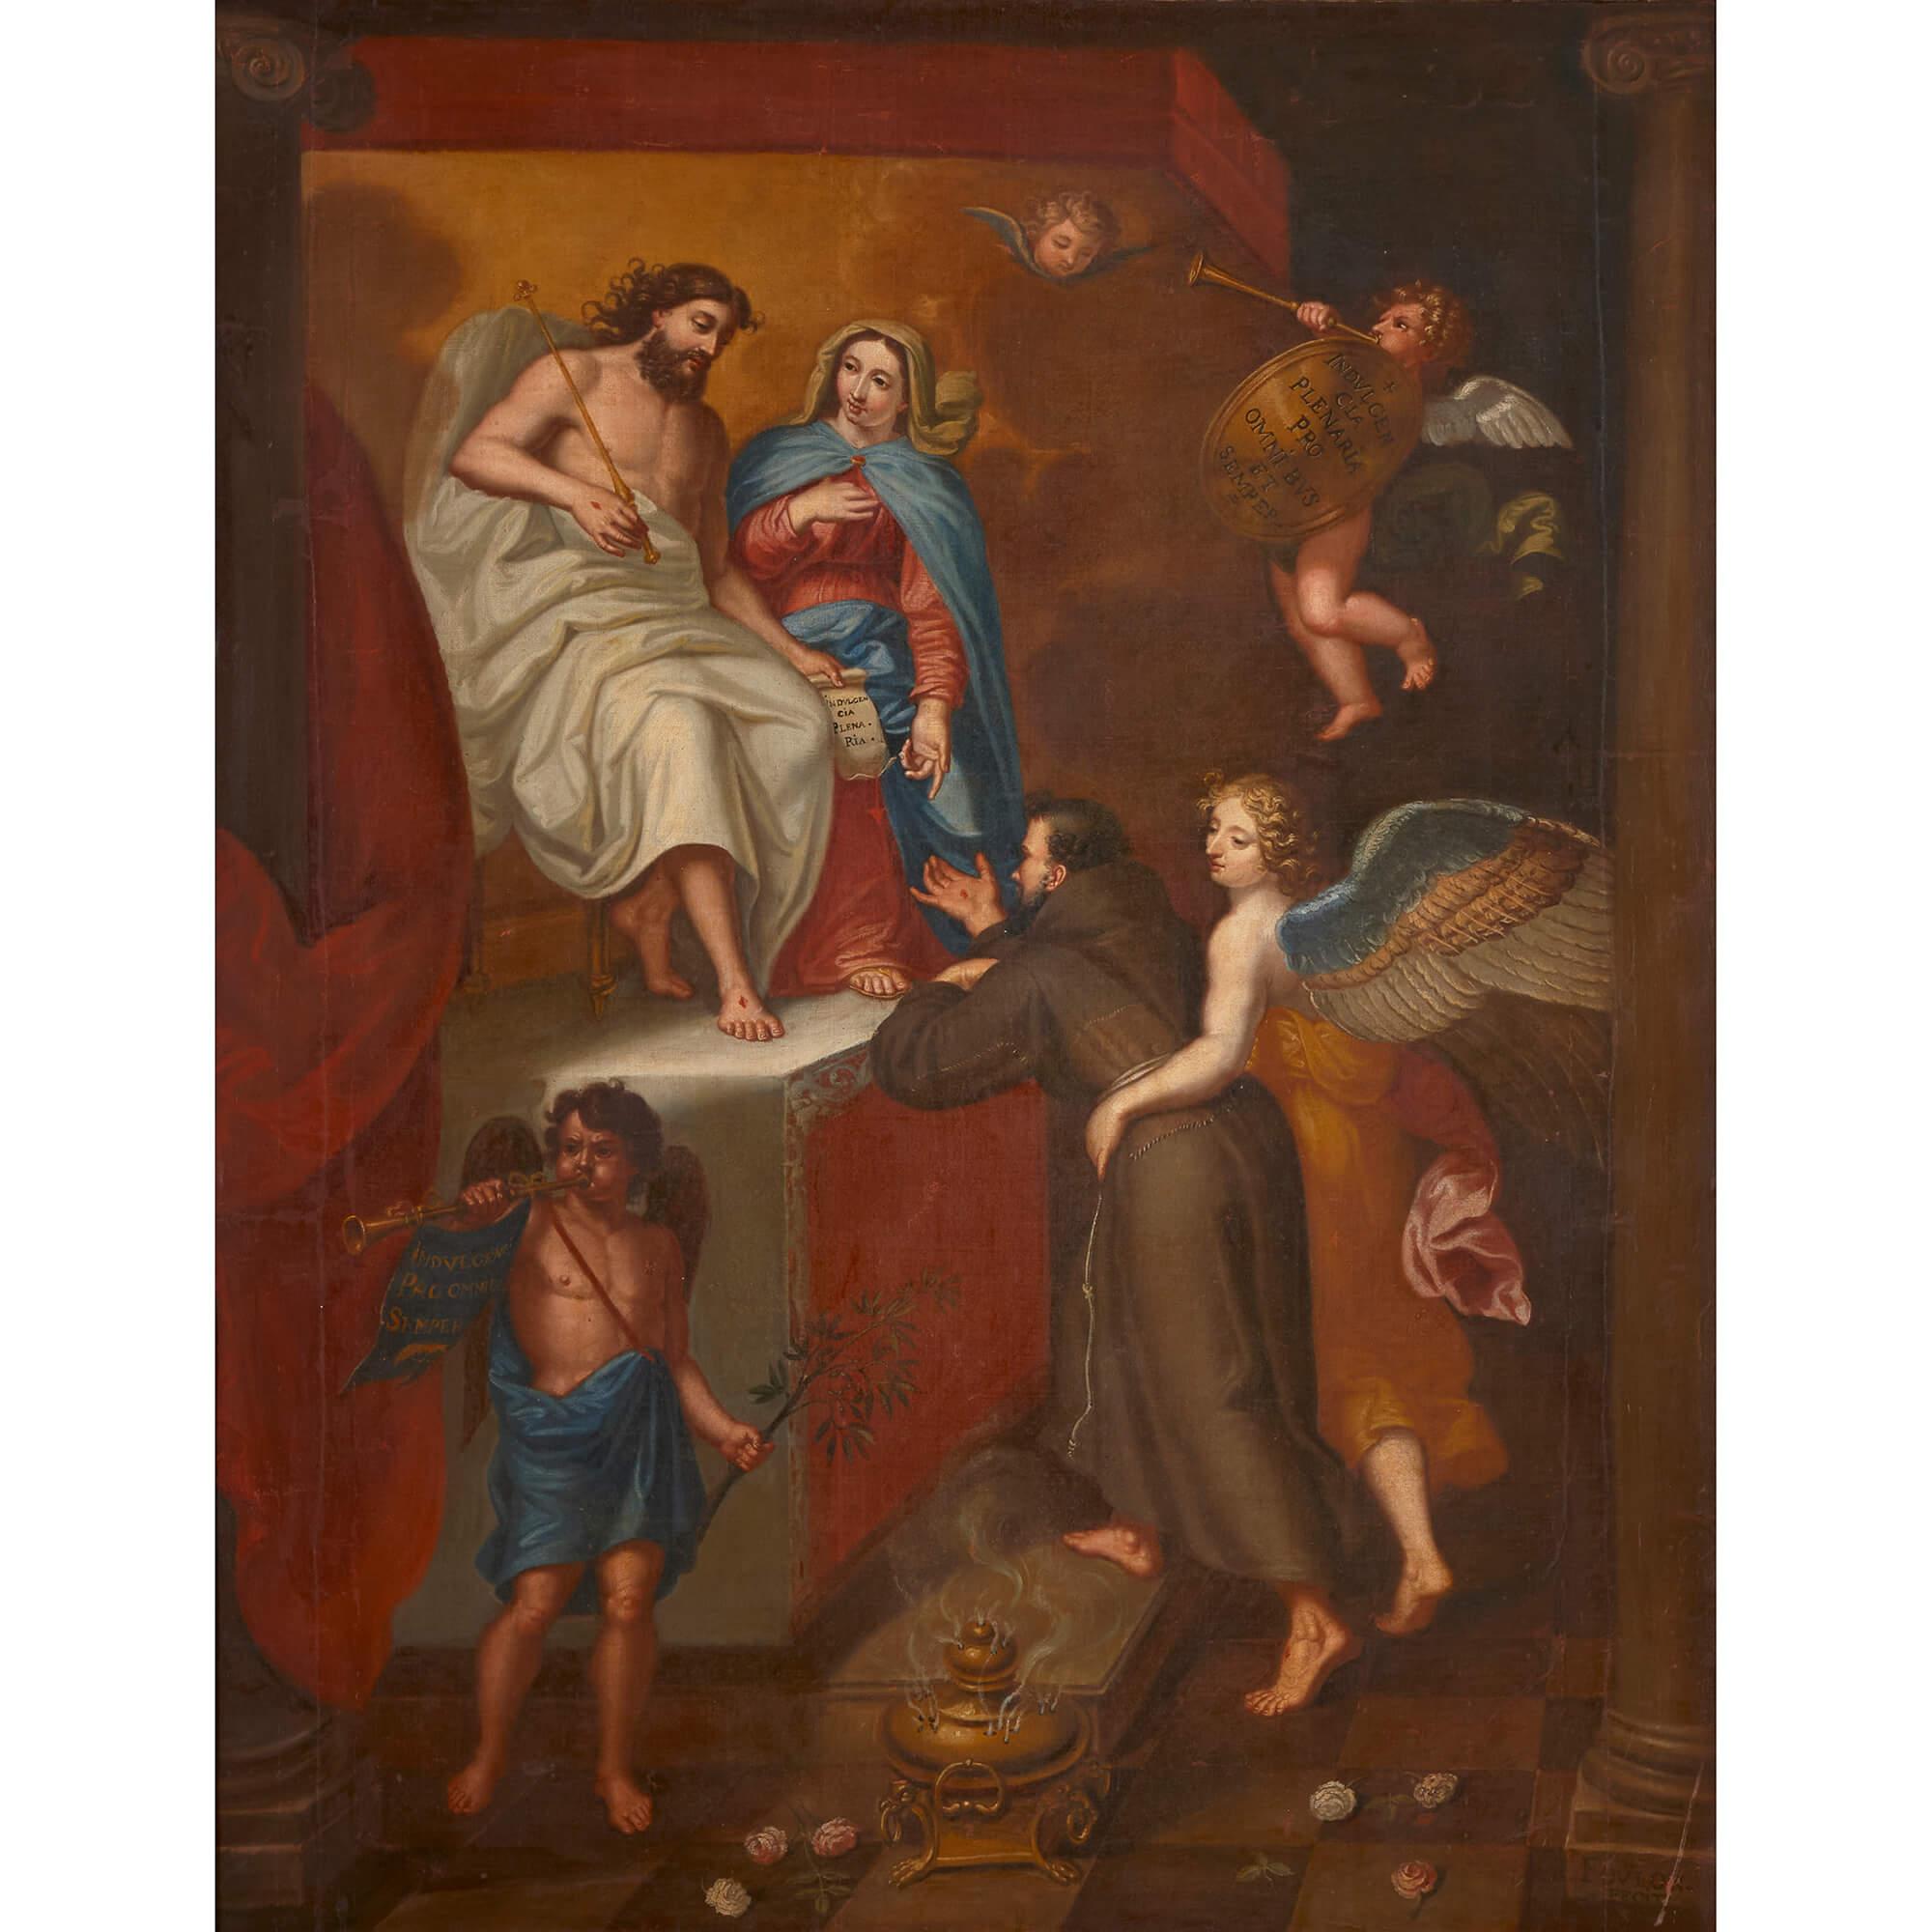 A large antique Christian painting of the vision of Saint Francis - Painting by Unknown